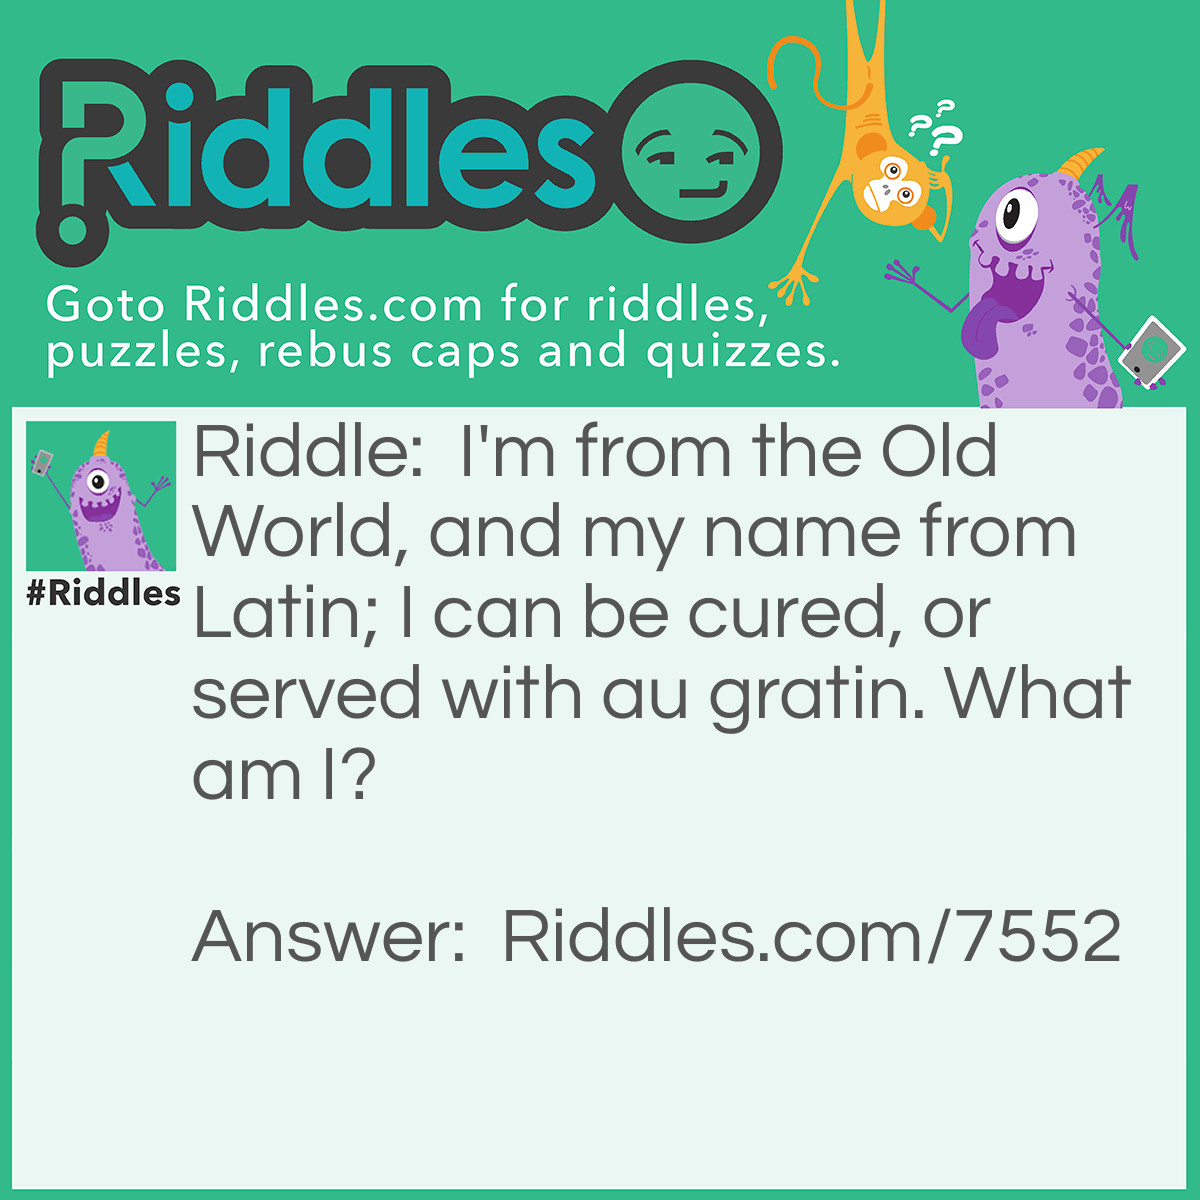 Riddle: I'm from the Old World, and my name from Latin; I can be cured, or served with au gratin. What am I? Answer: Beef.